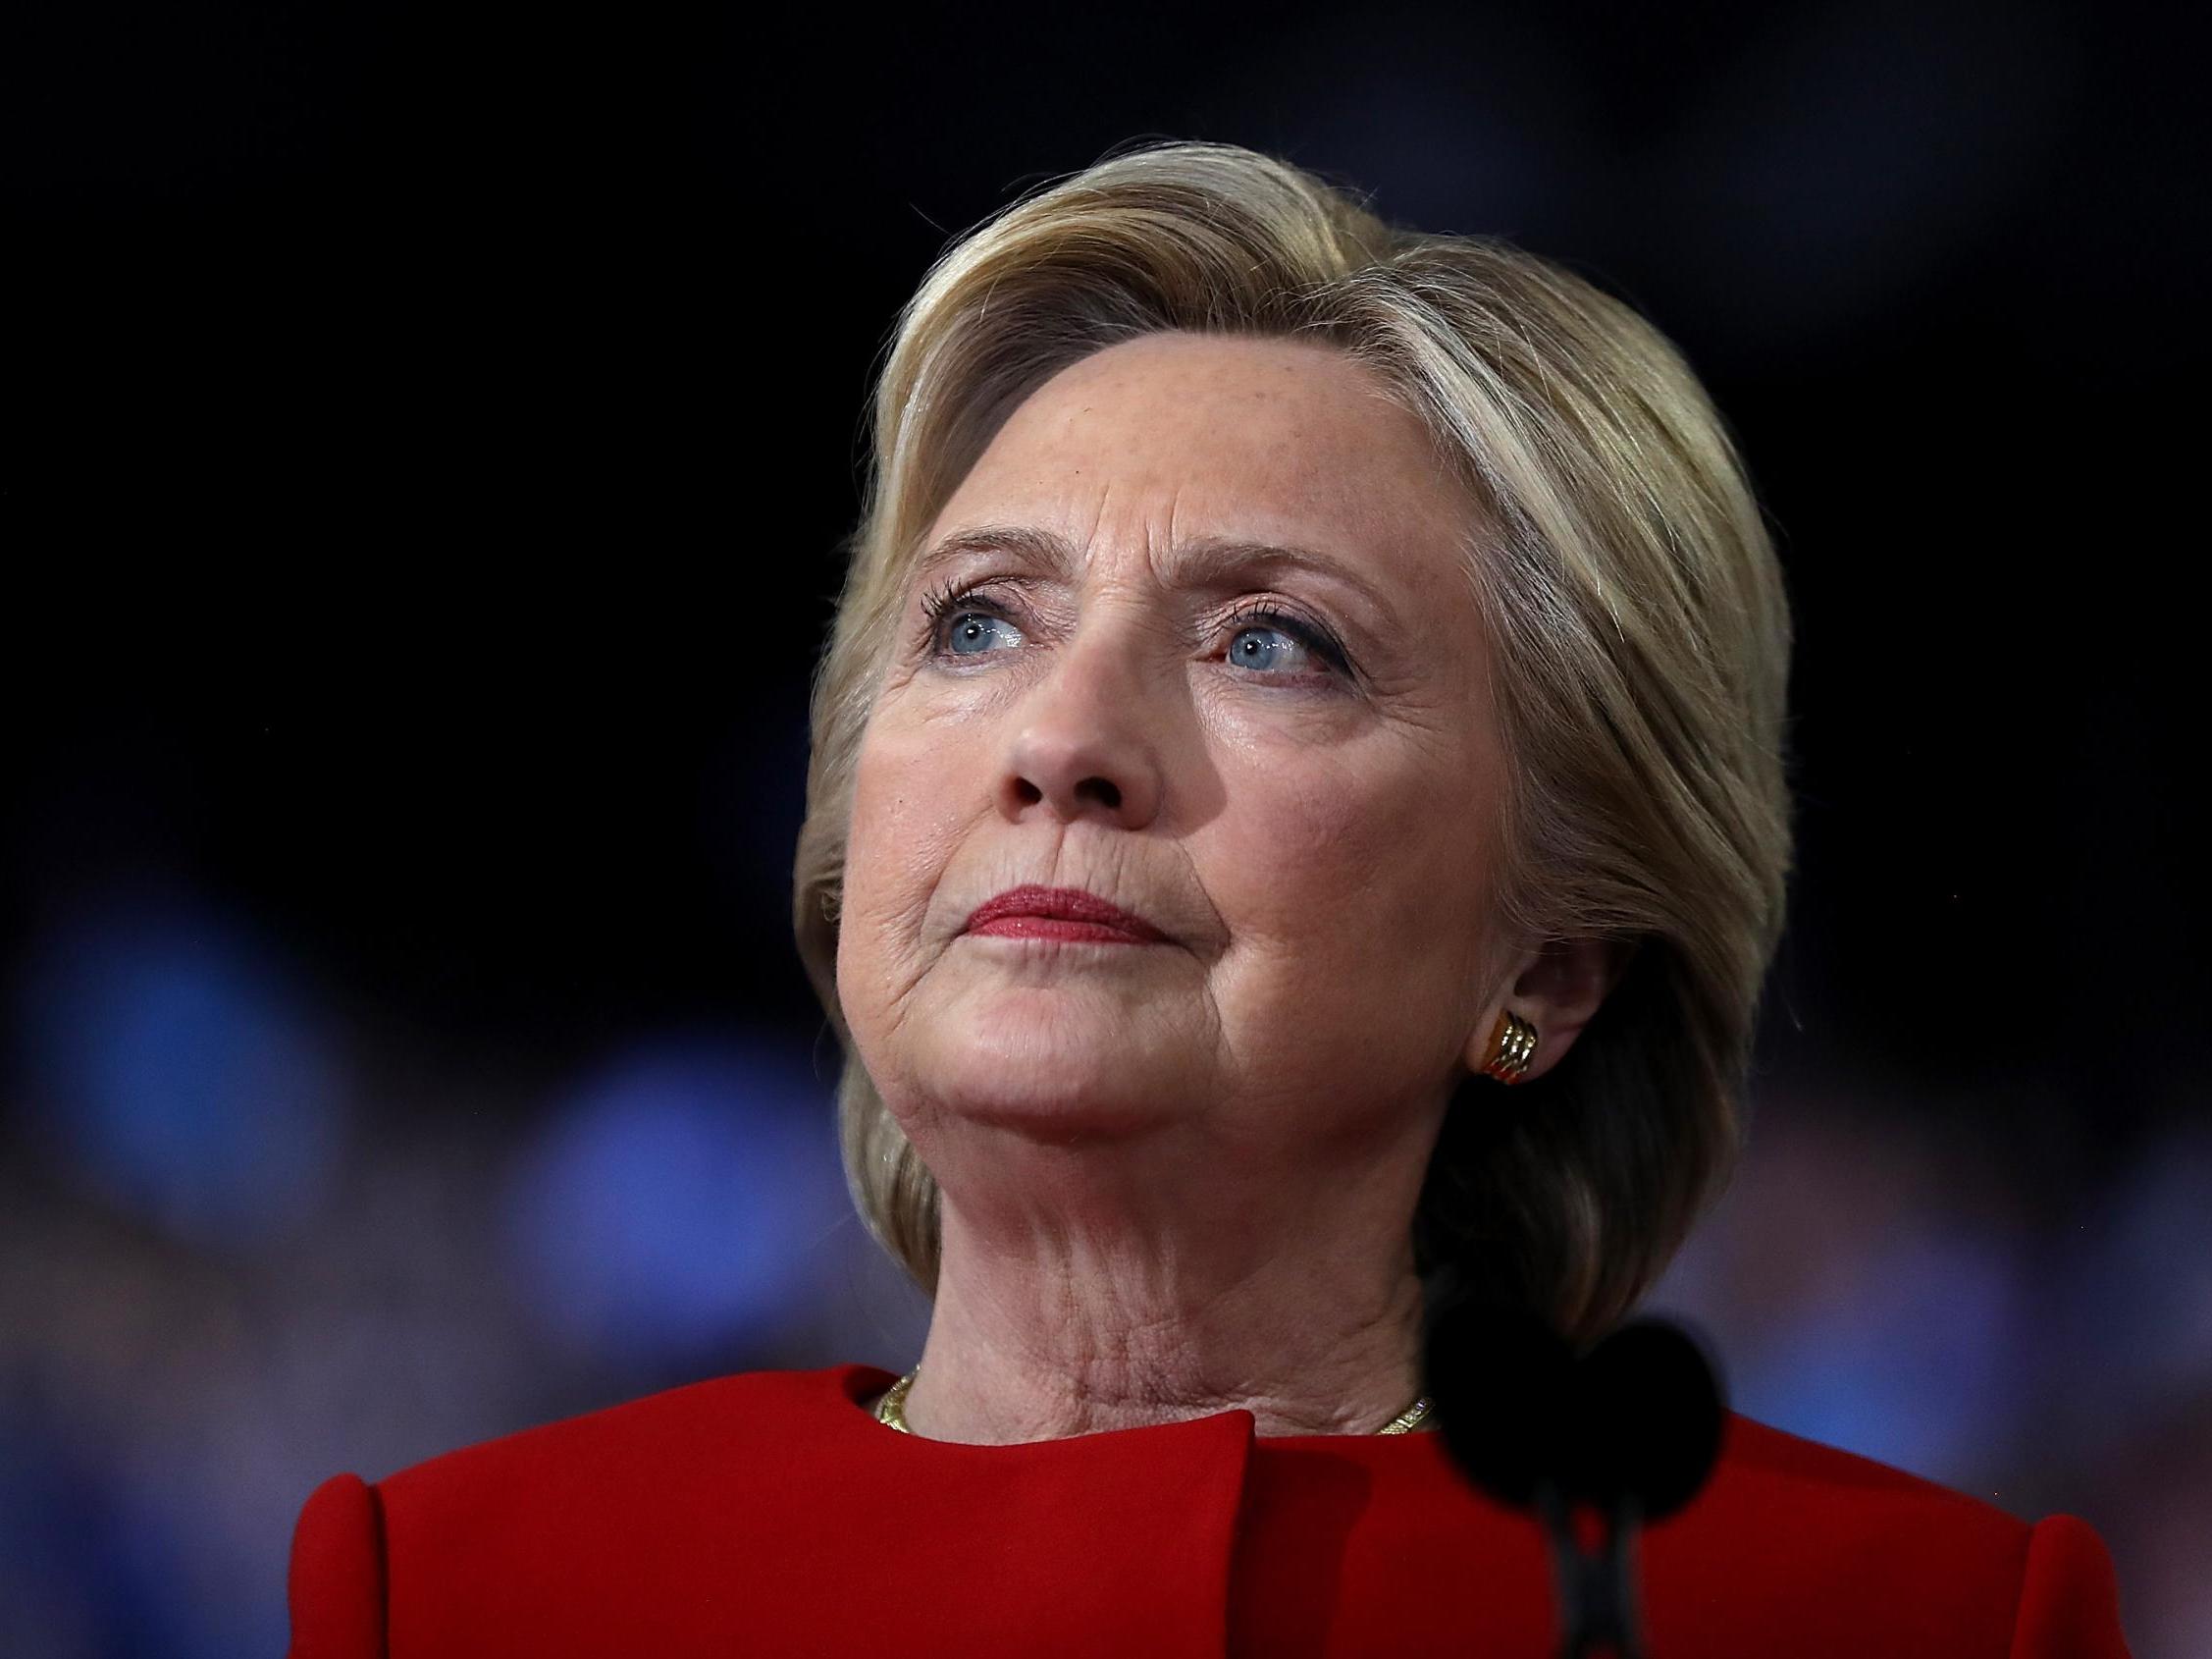 Iowa caucus: Former Hillary Clinton staff revealed to be behind 'Shadow' app that caused chaos